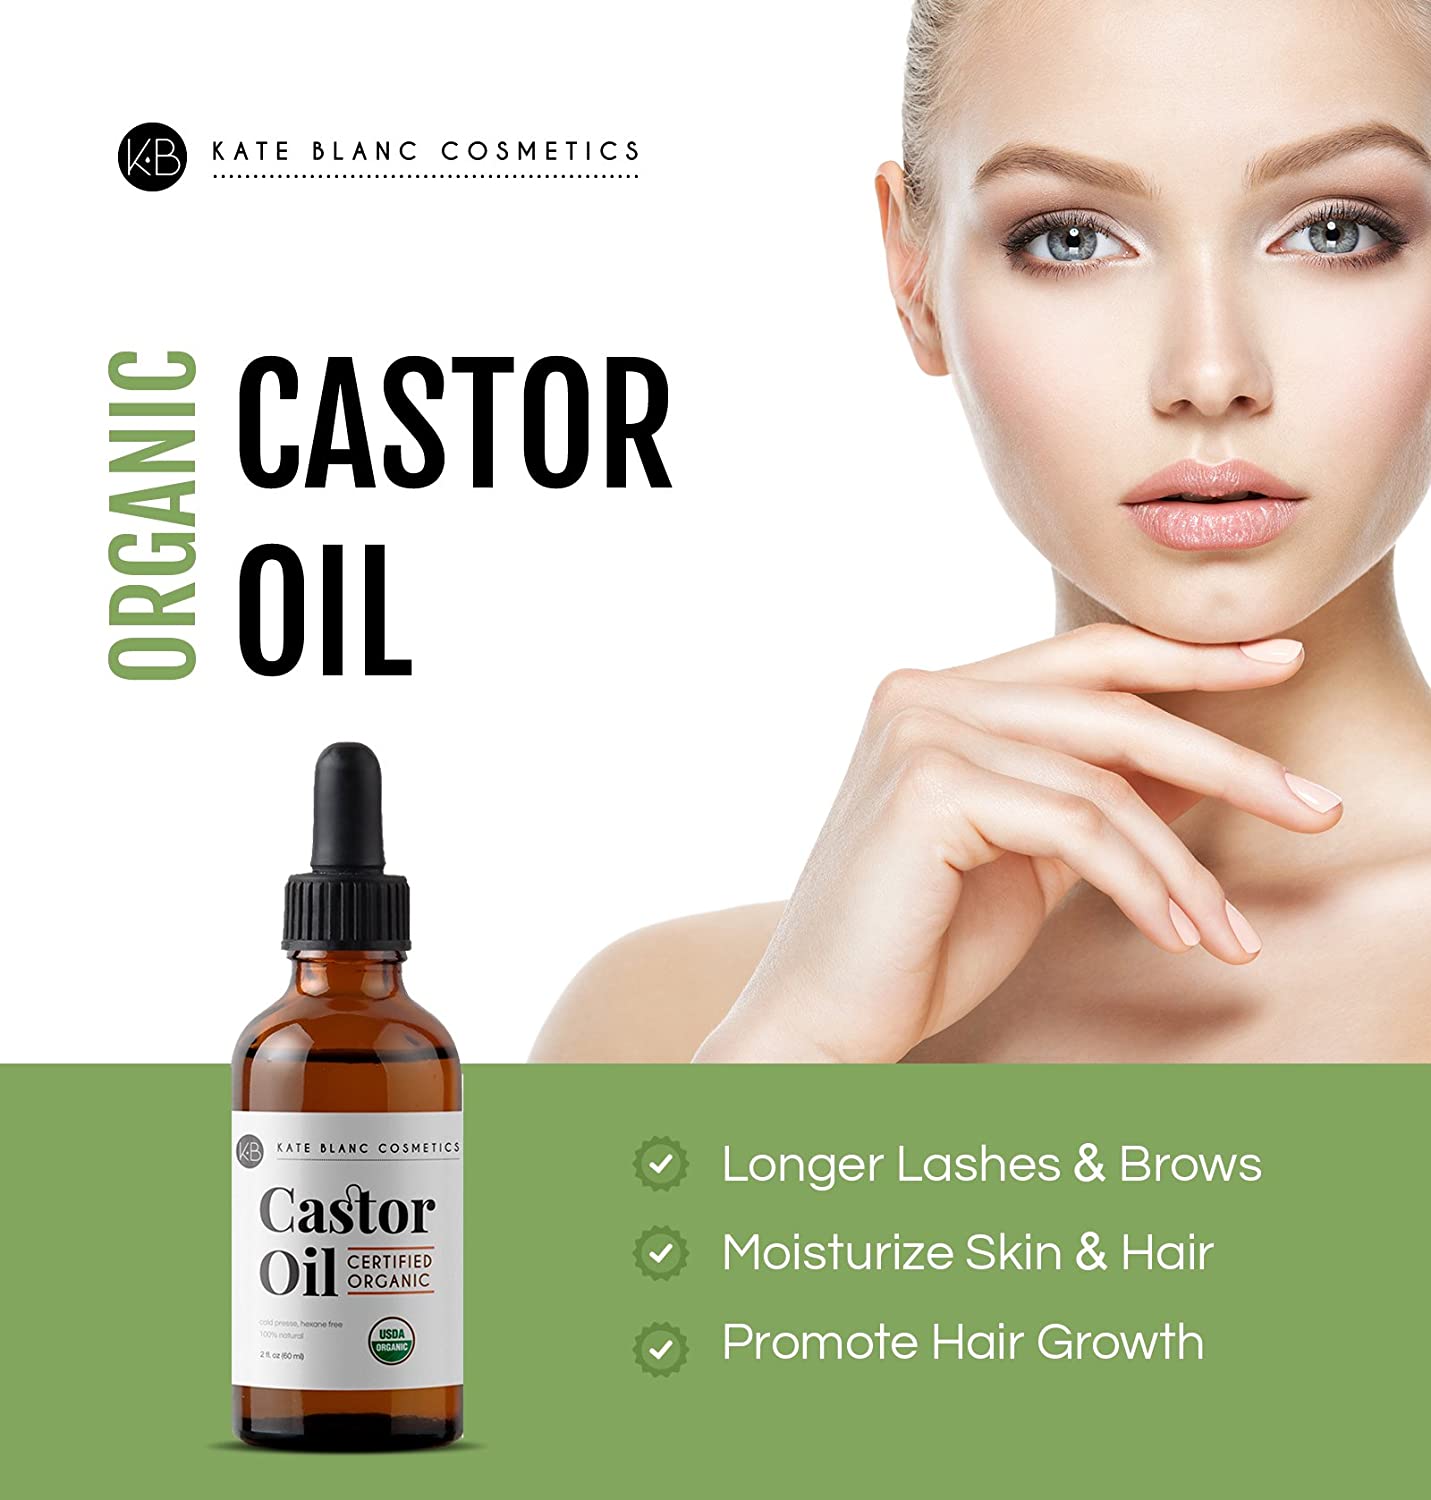 Castor Oil (4oz), USDA Certified Organic, 100% Pure, Cold-Pressed, Hexane Free by Kate Blanc. Stimulate Growth for Eyelashes, Eyebrows, Hair Skin Moisturizer & Oil Cleanse. FREE Starter Kit